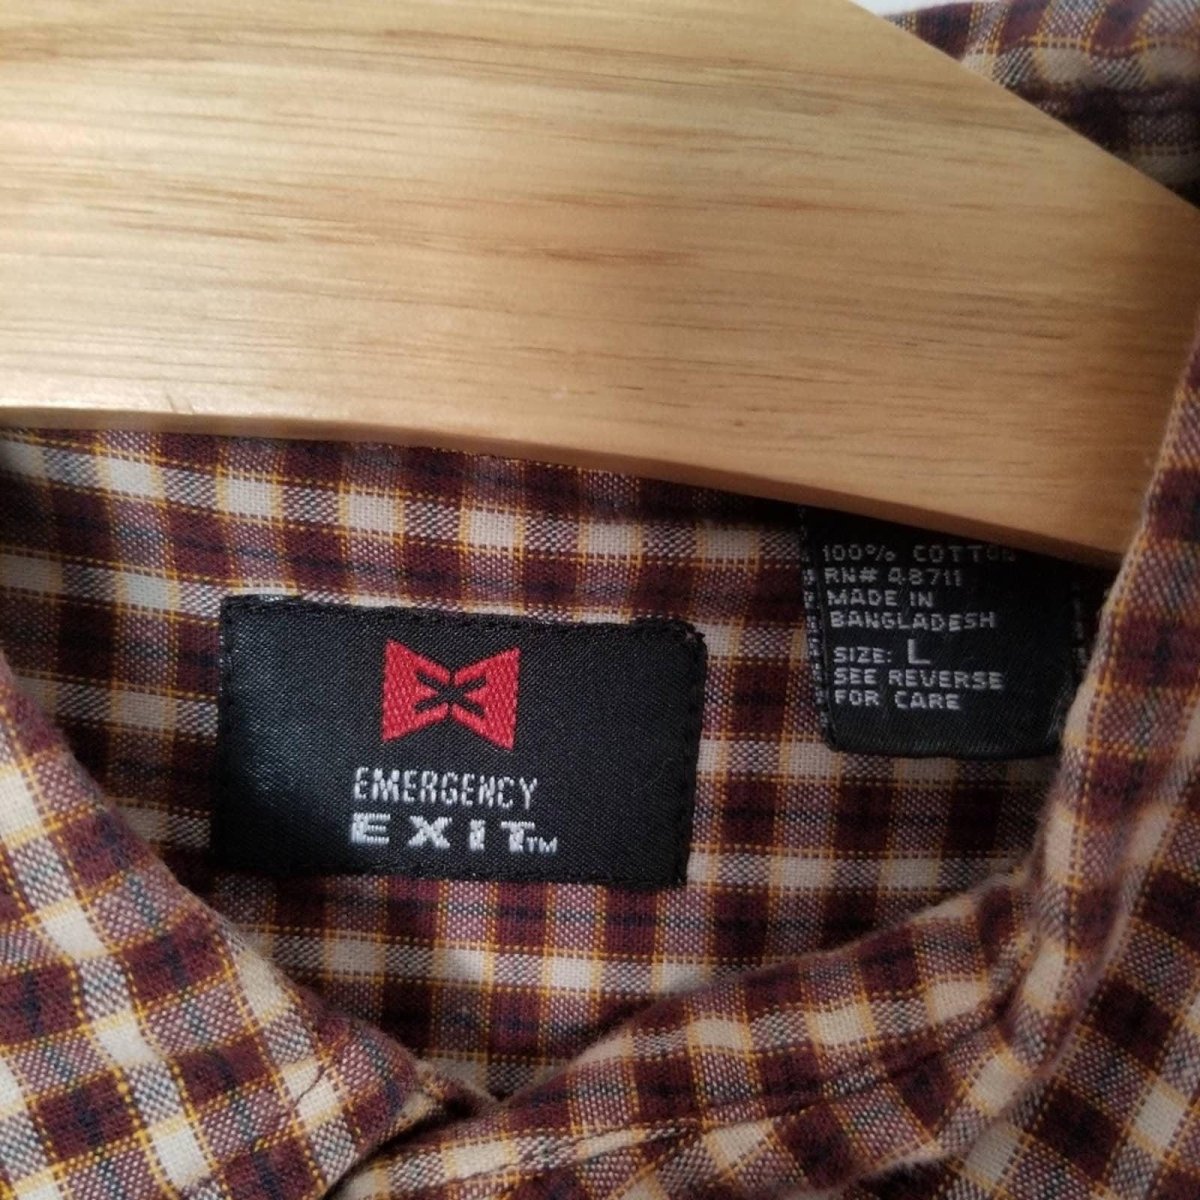 90s/Y2K Oversized Plaid Buttondown Shirt Men Large - themallvintage The Mall Vintage